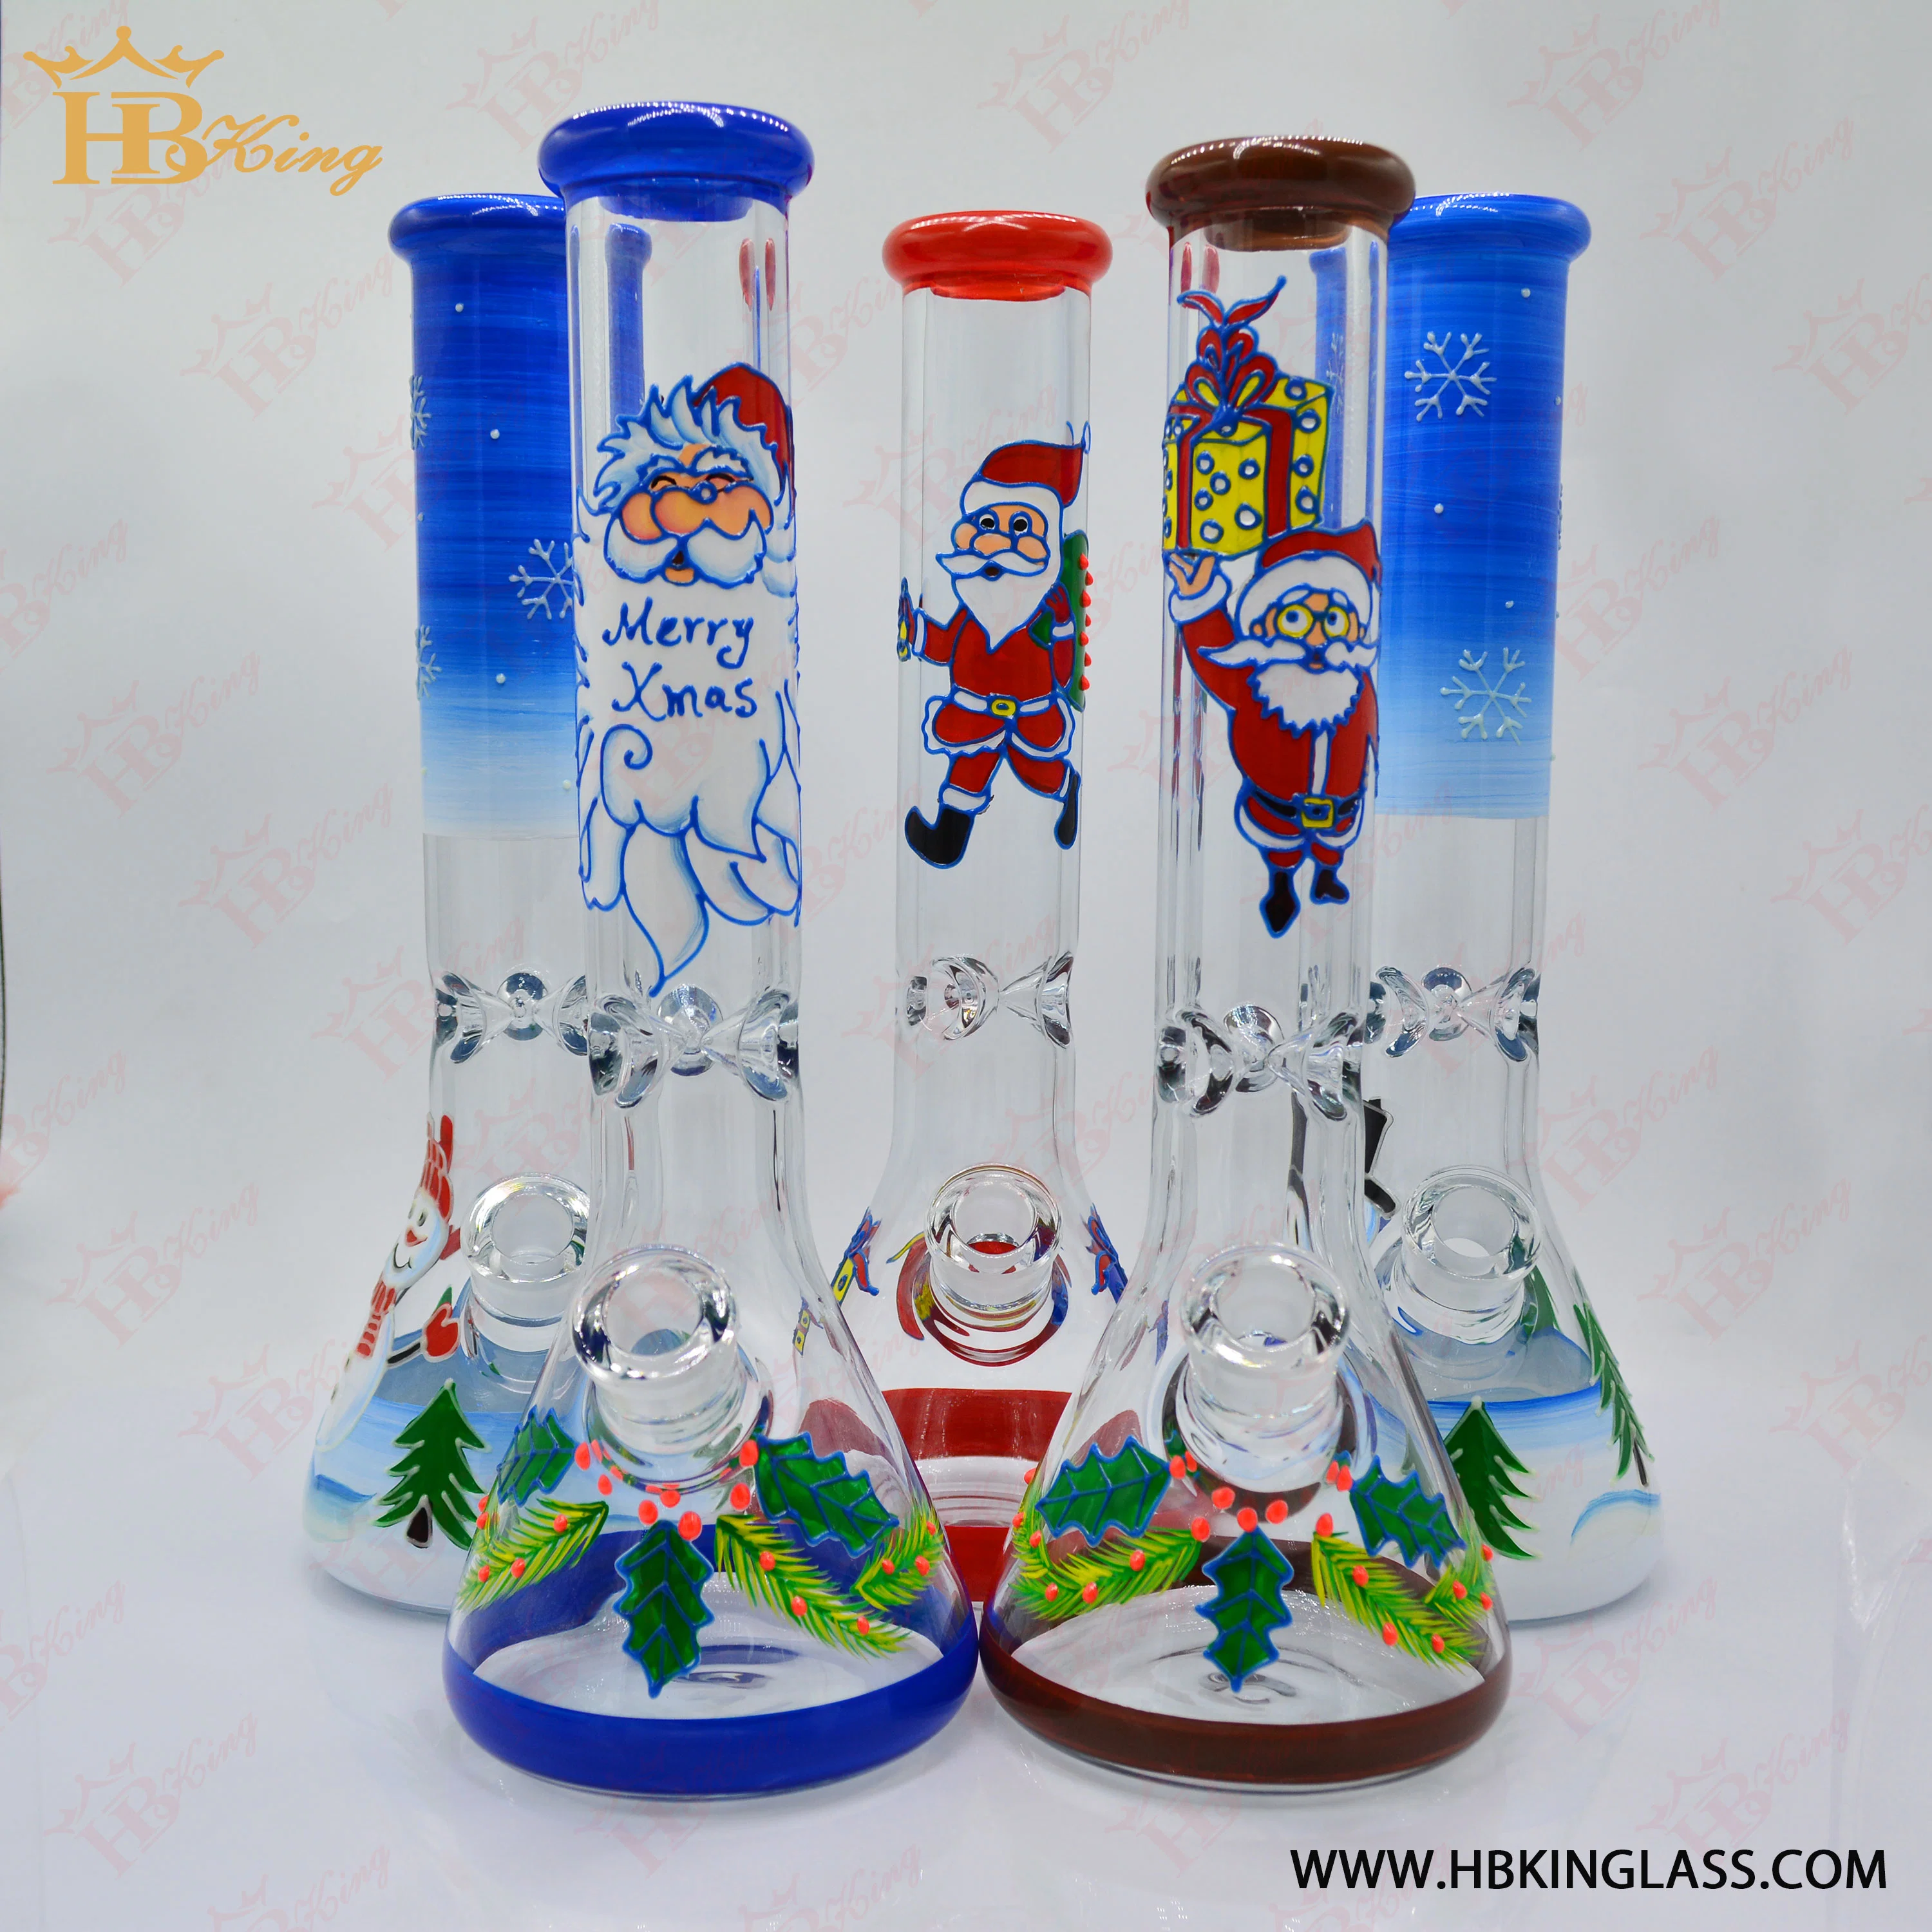 Wholesale 350mm High Borosilicate Glass Hand-Painted Zombie Character Triangle Bottle Oil Burner Pipe Smoking Pipe